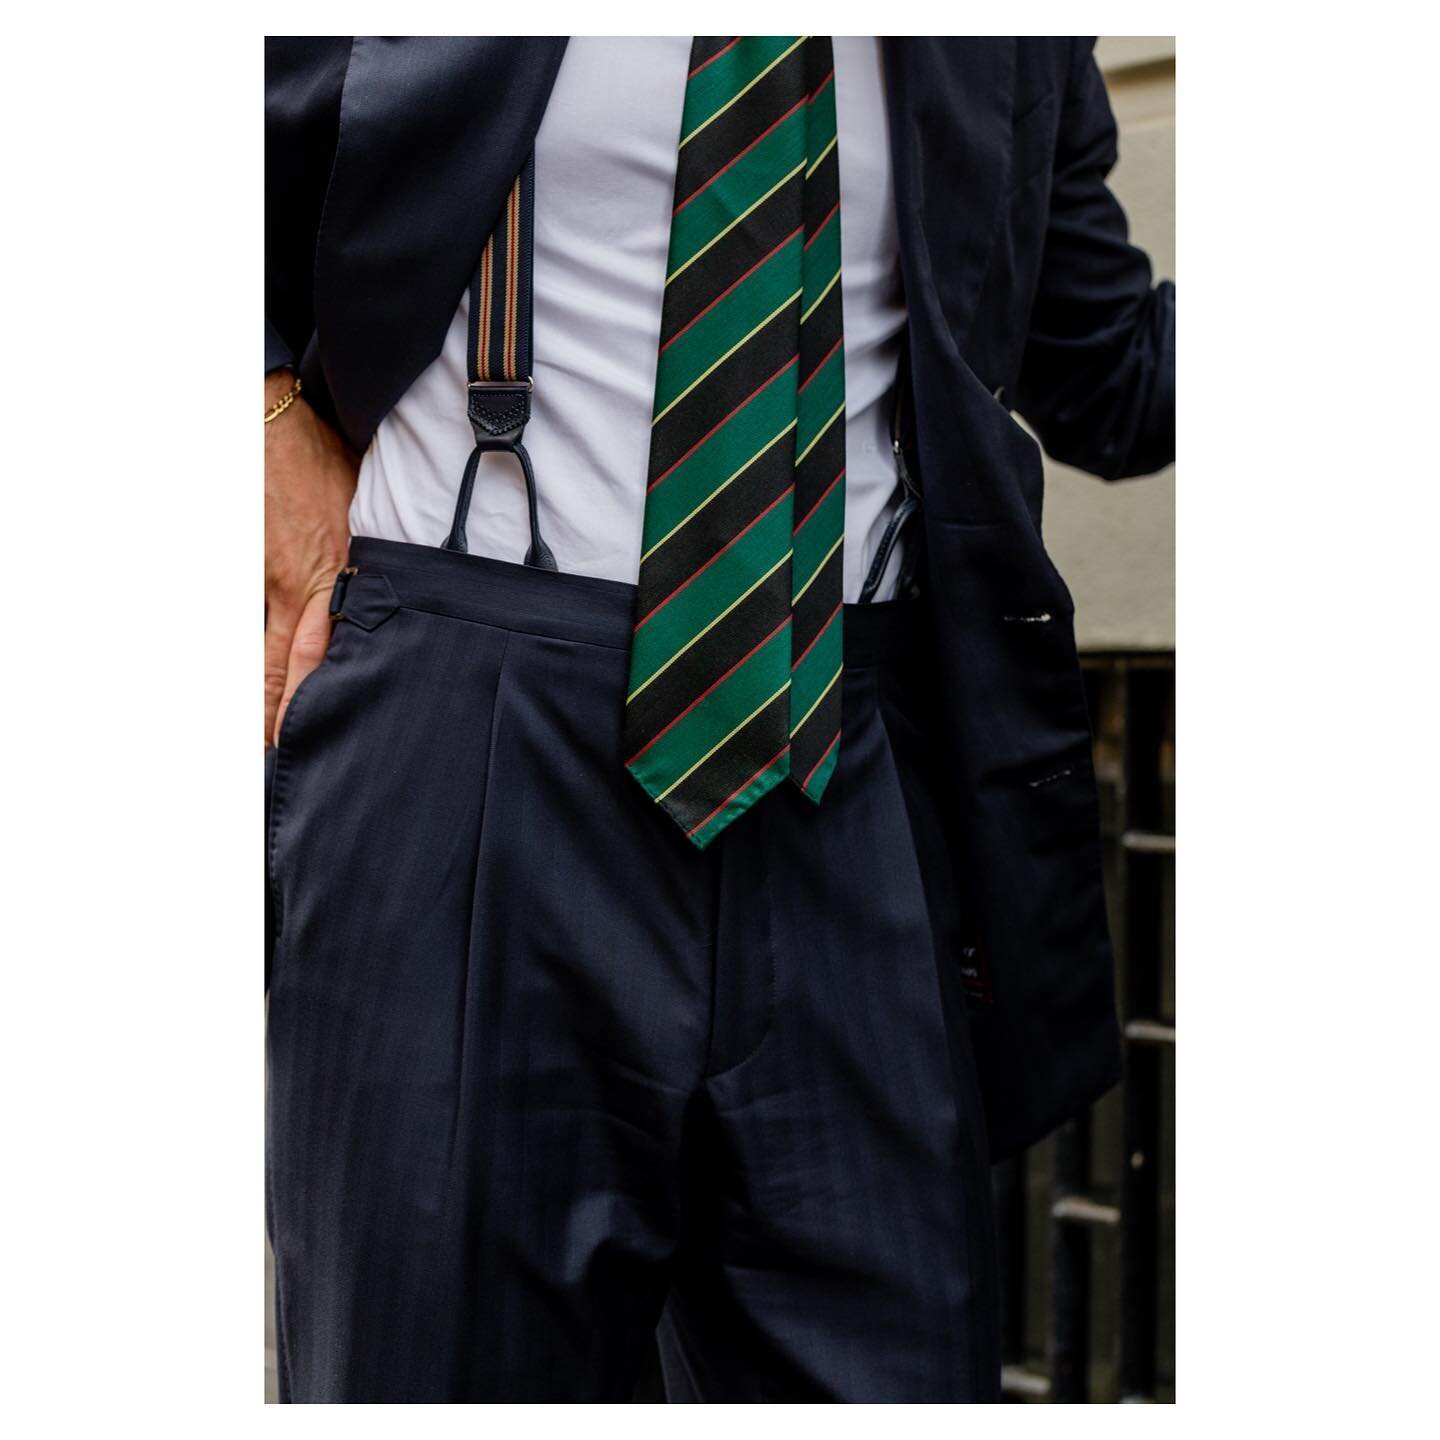 Our green regimental multi-striped tie, cut from pure super 120s wool by @hollandandsherryapparel. Naturally unlined and finished in a 7-fold construction.
Available online via @worldofbaltzar
📸 @pontusjonsen 
#dreamingofmonday